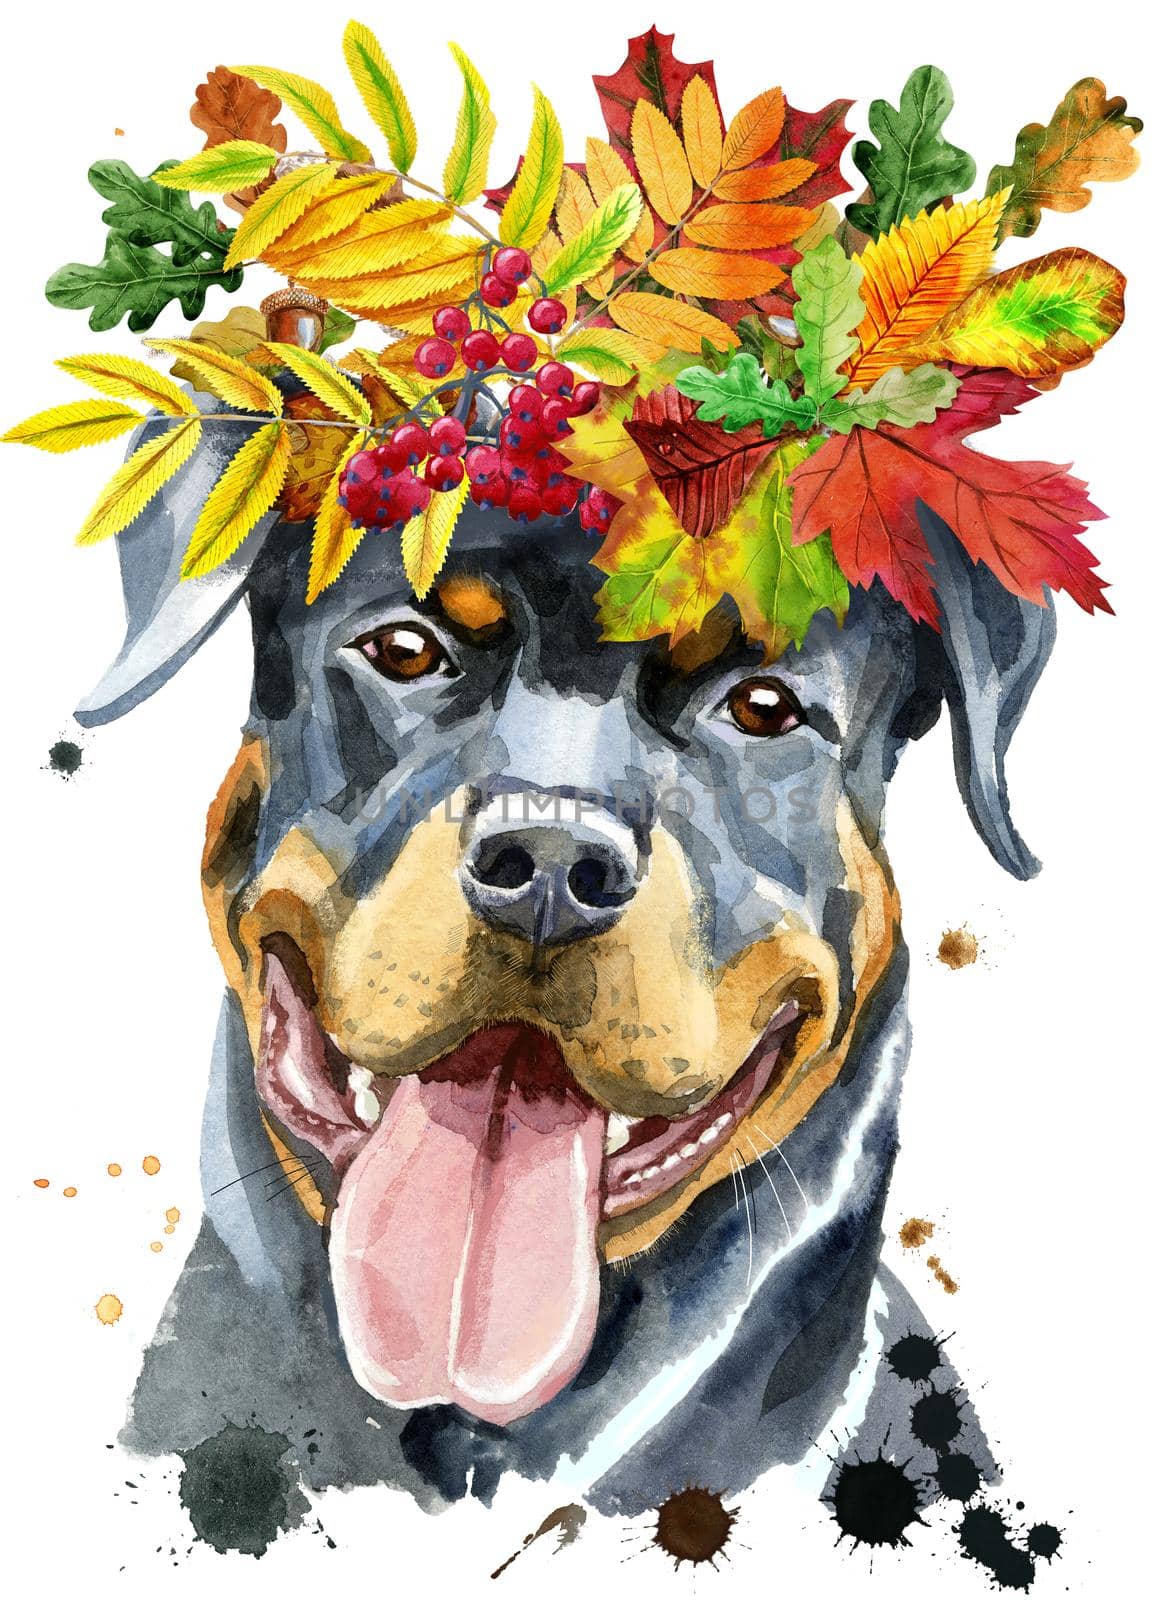 Watercolor portrait of rottweiler with wreath of autumn leaves by NataOmsk